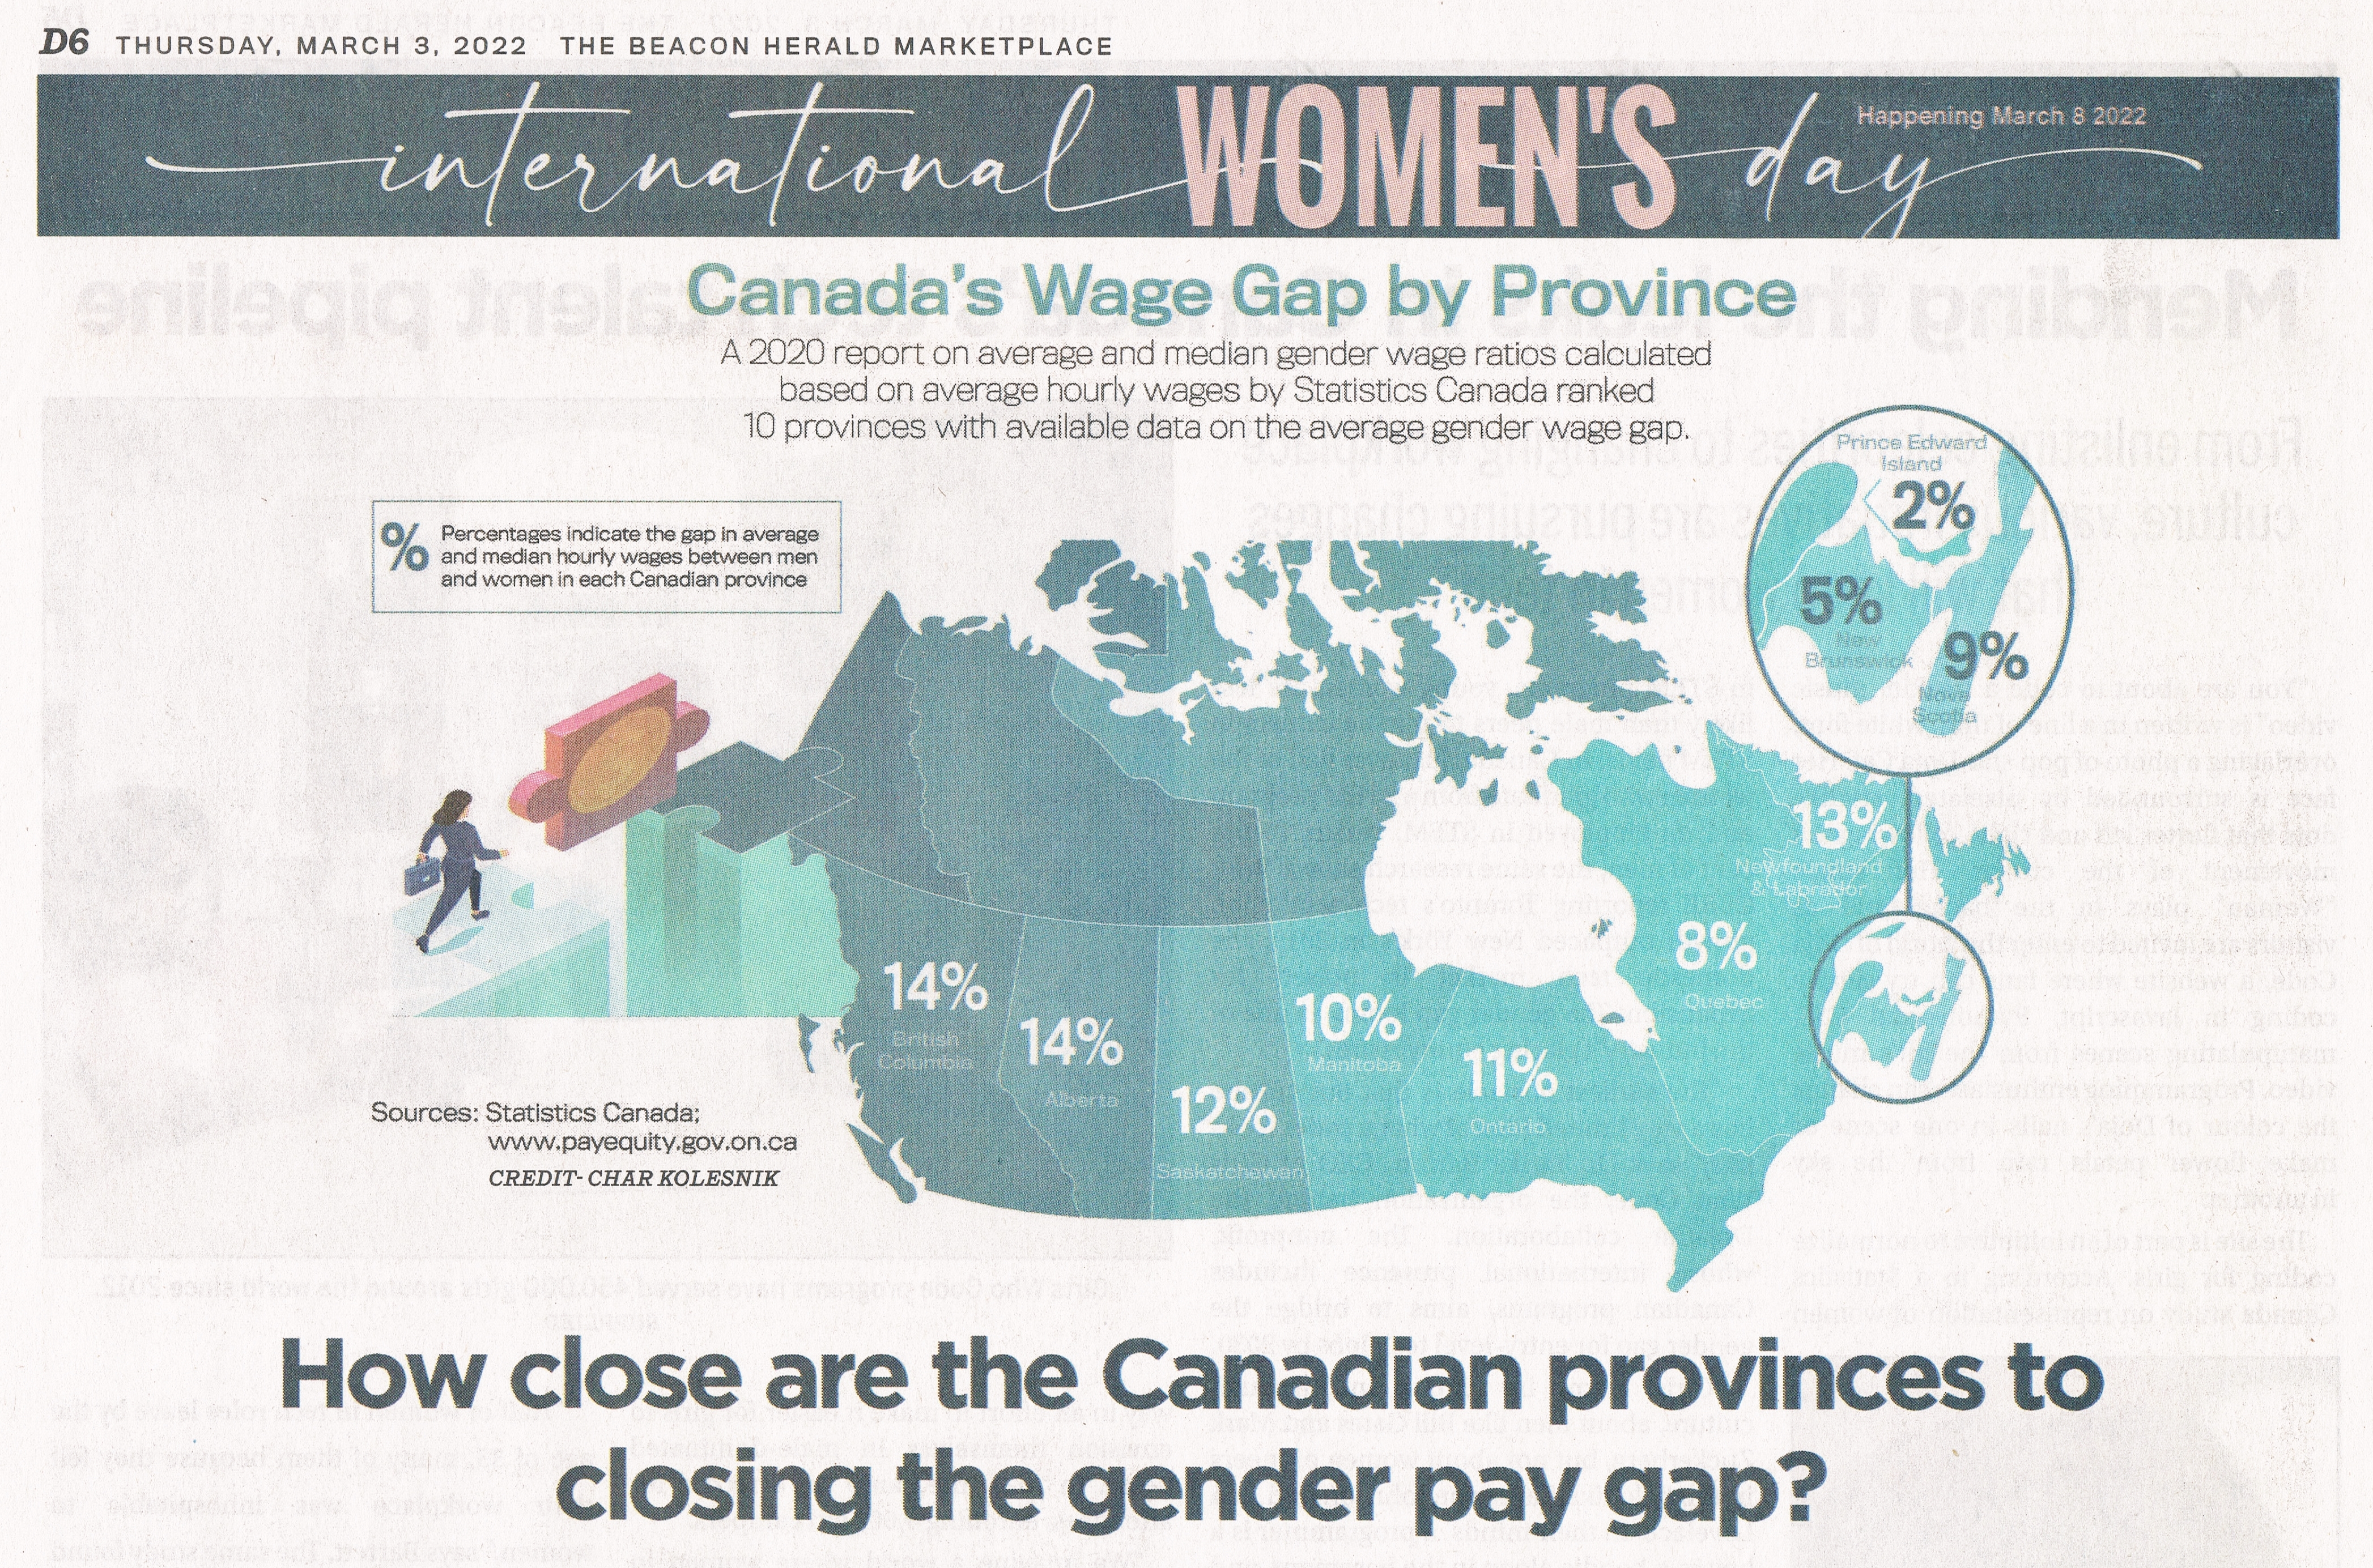 map of Canada showing women's wage gap in the provinces